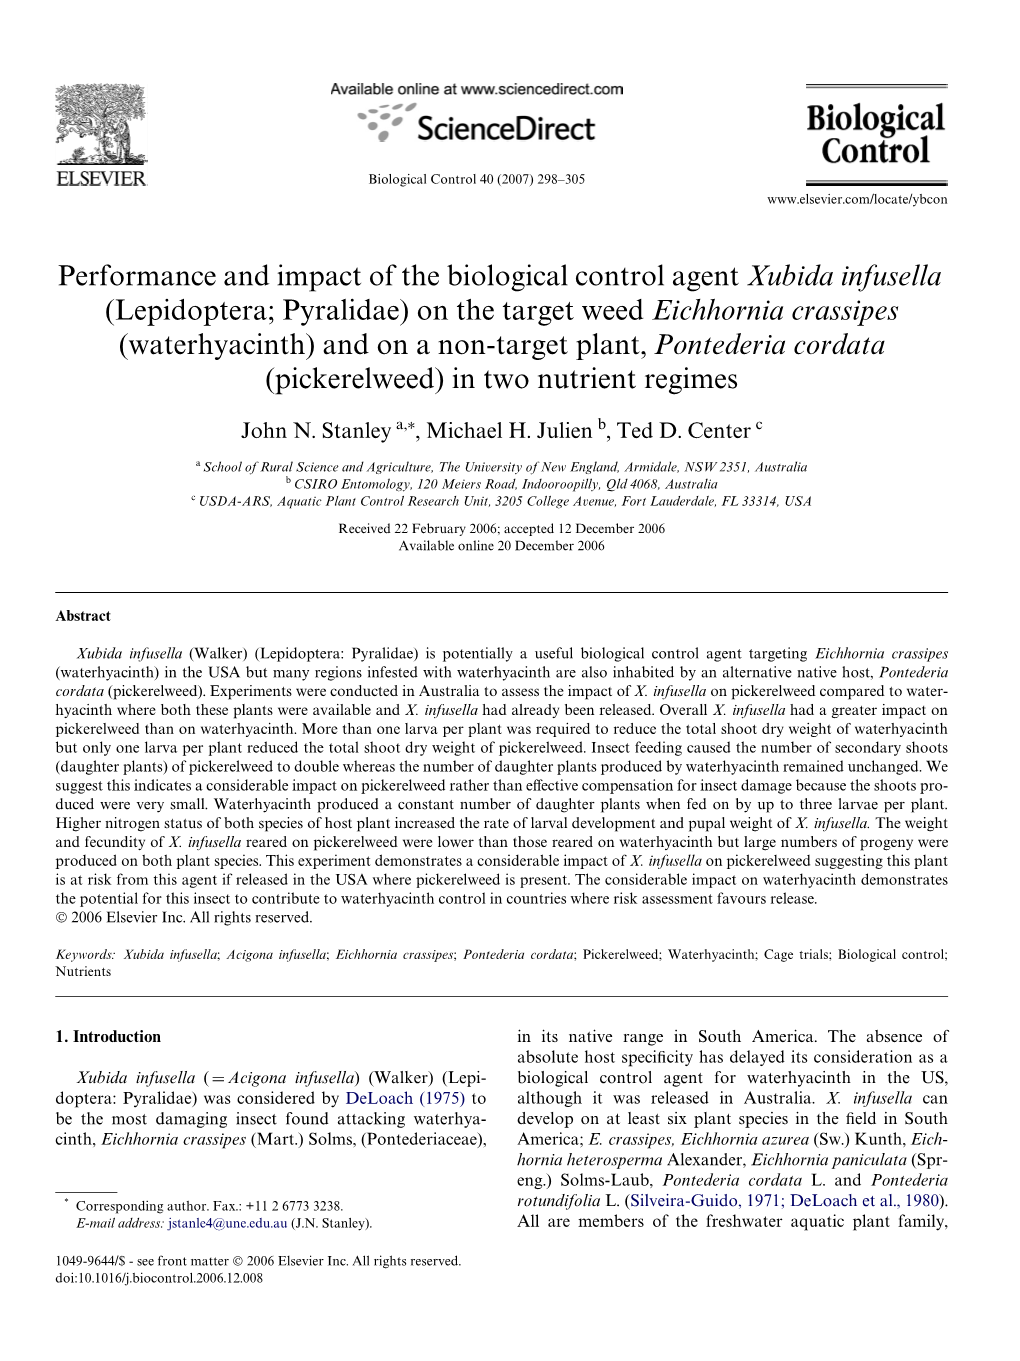 Performance and Impact of the Biological Control Agent Xubida